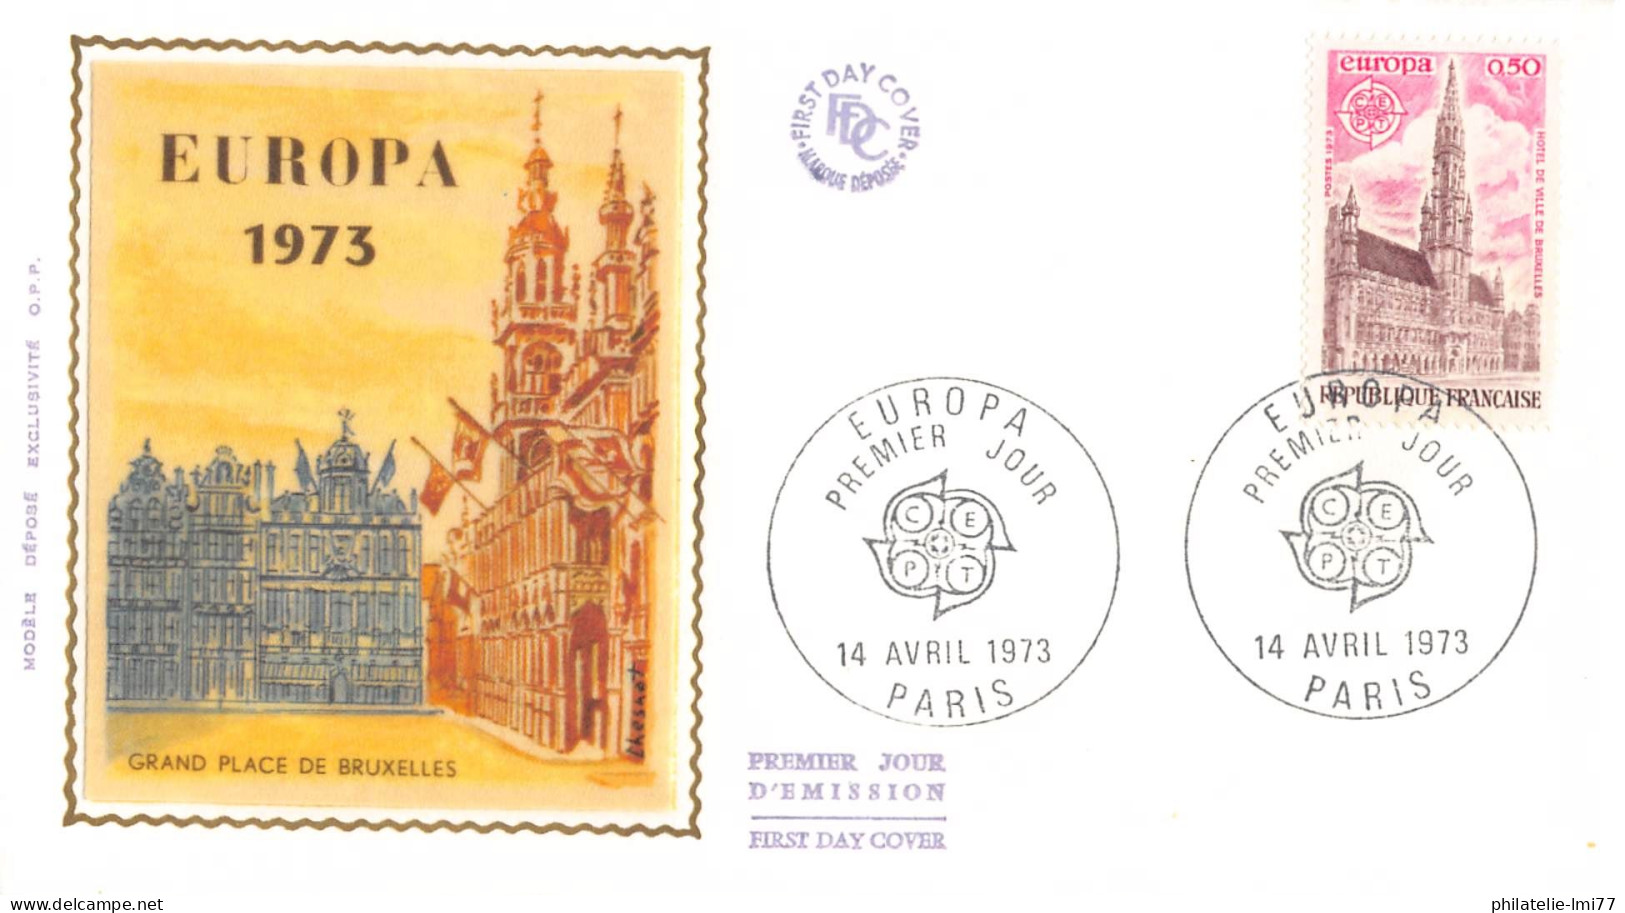 France - FDC Europa 1973 - 1973